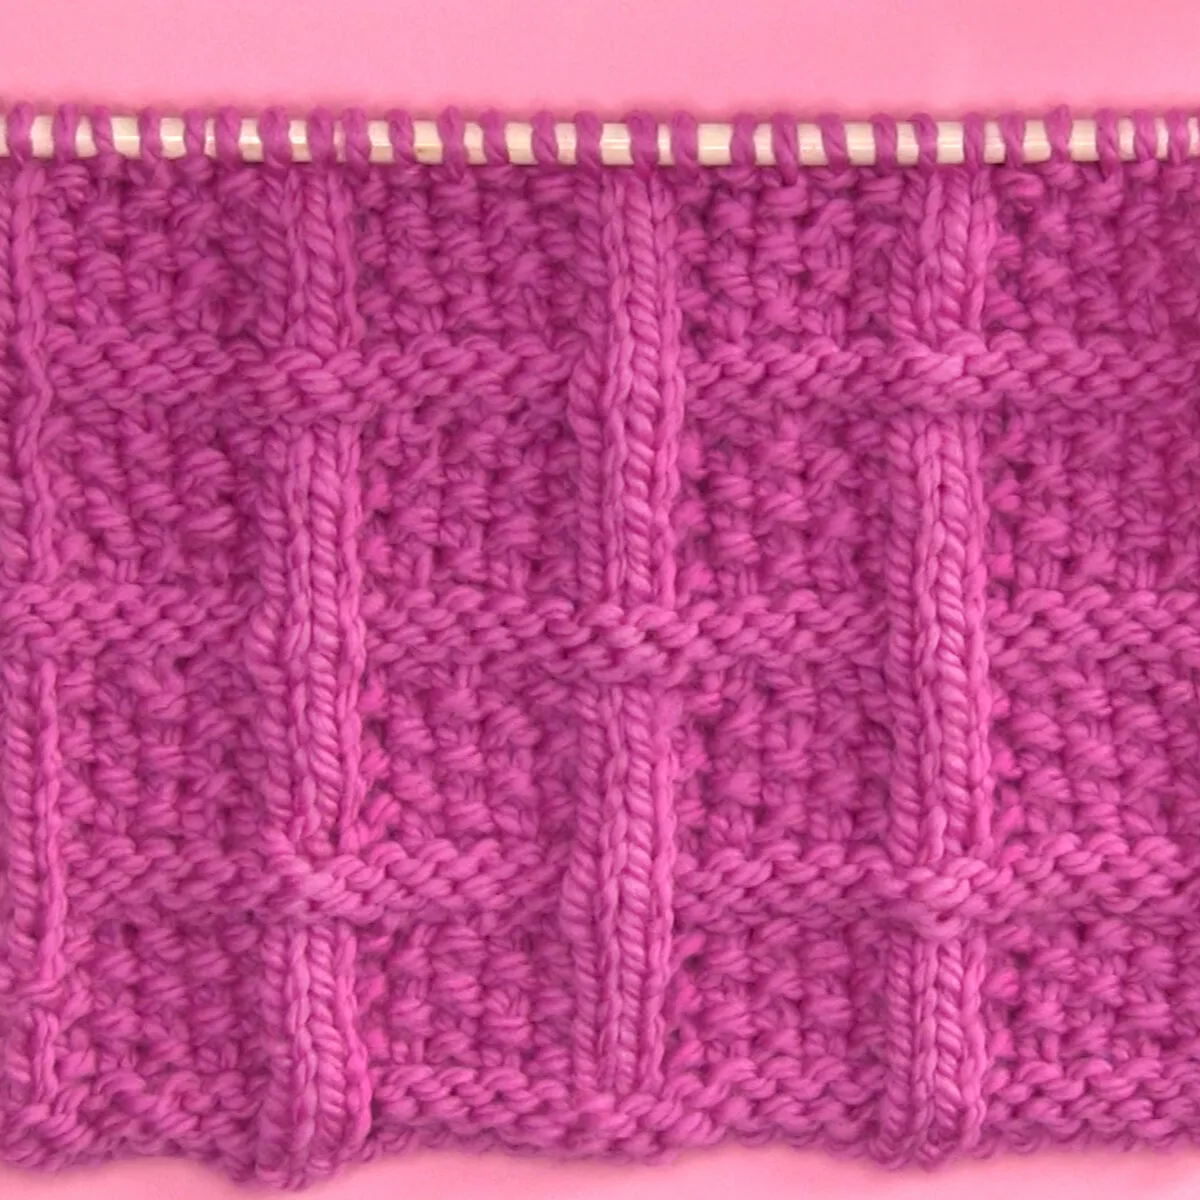 Lattice Seed Stitch Knitting Pattern in pink color yarn.